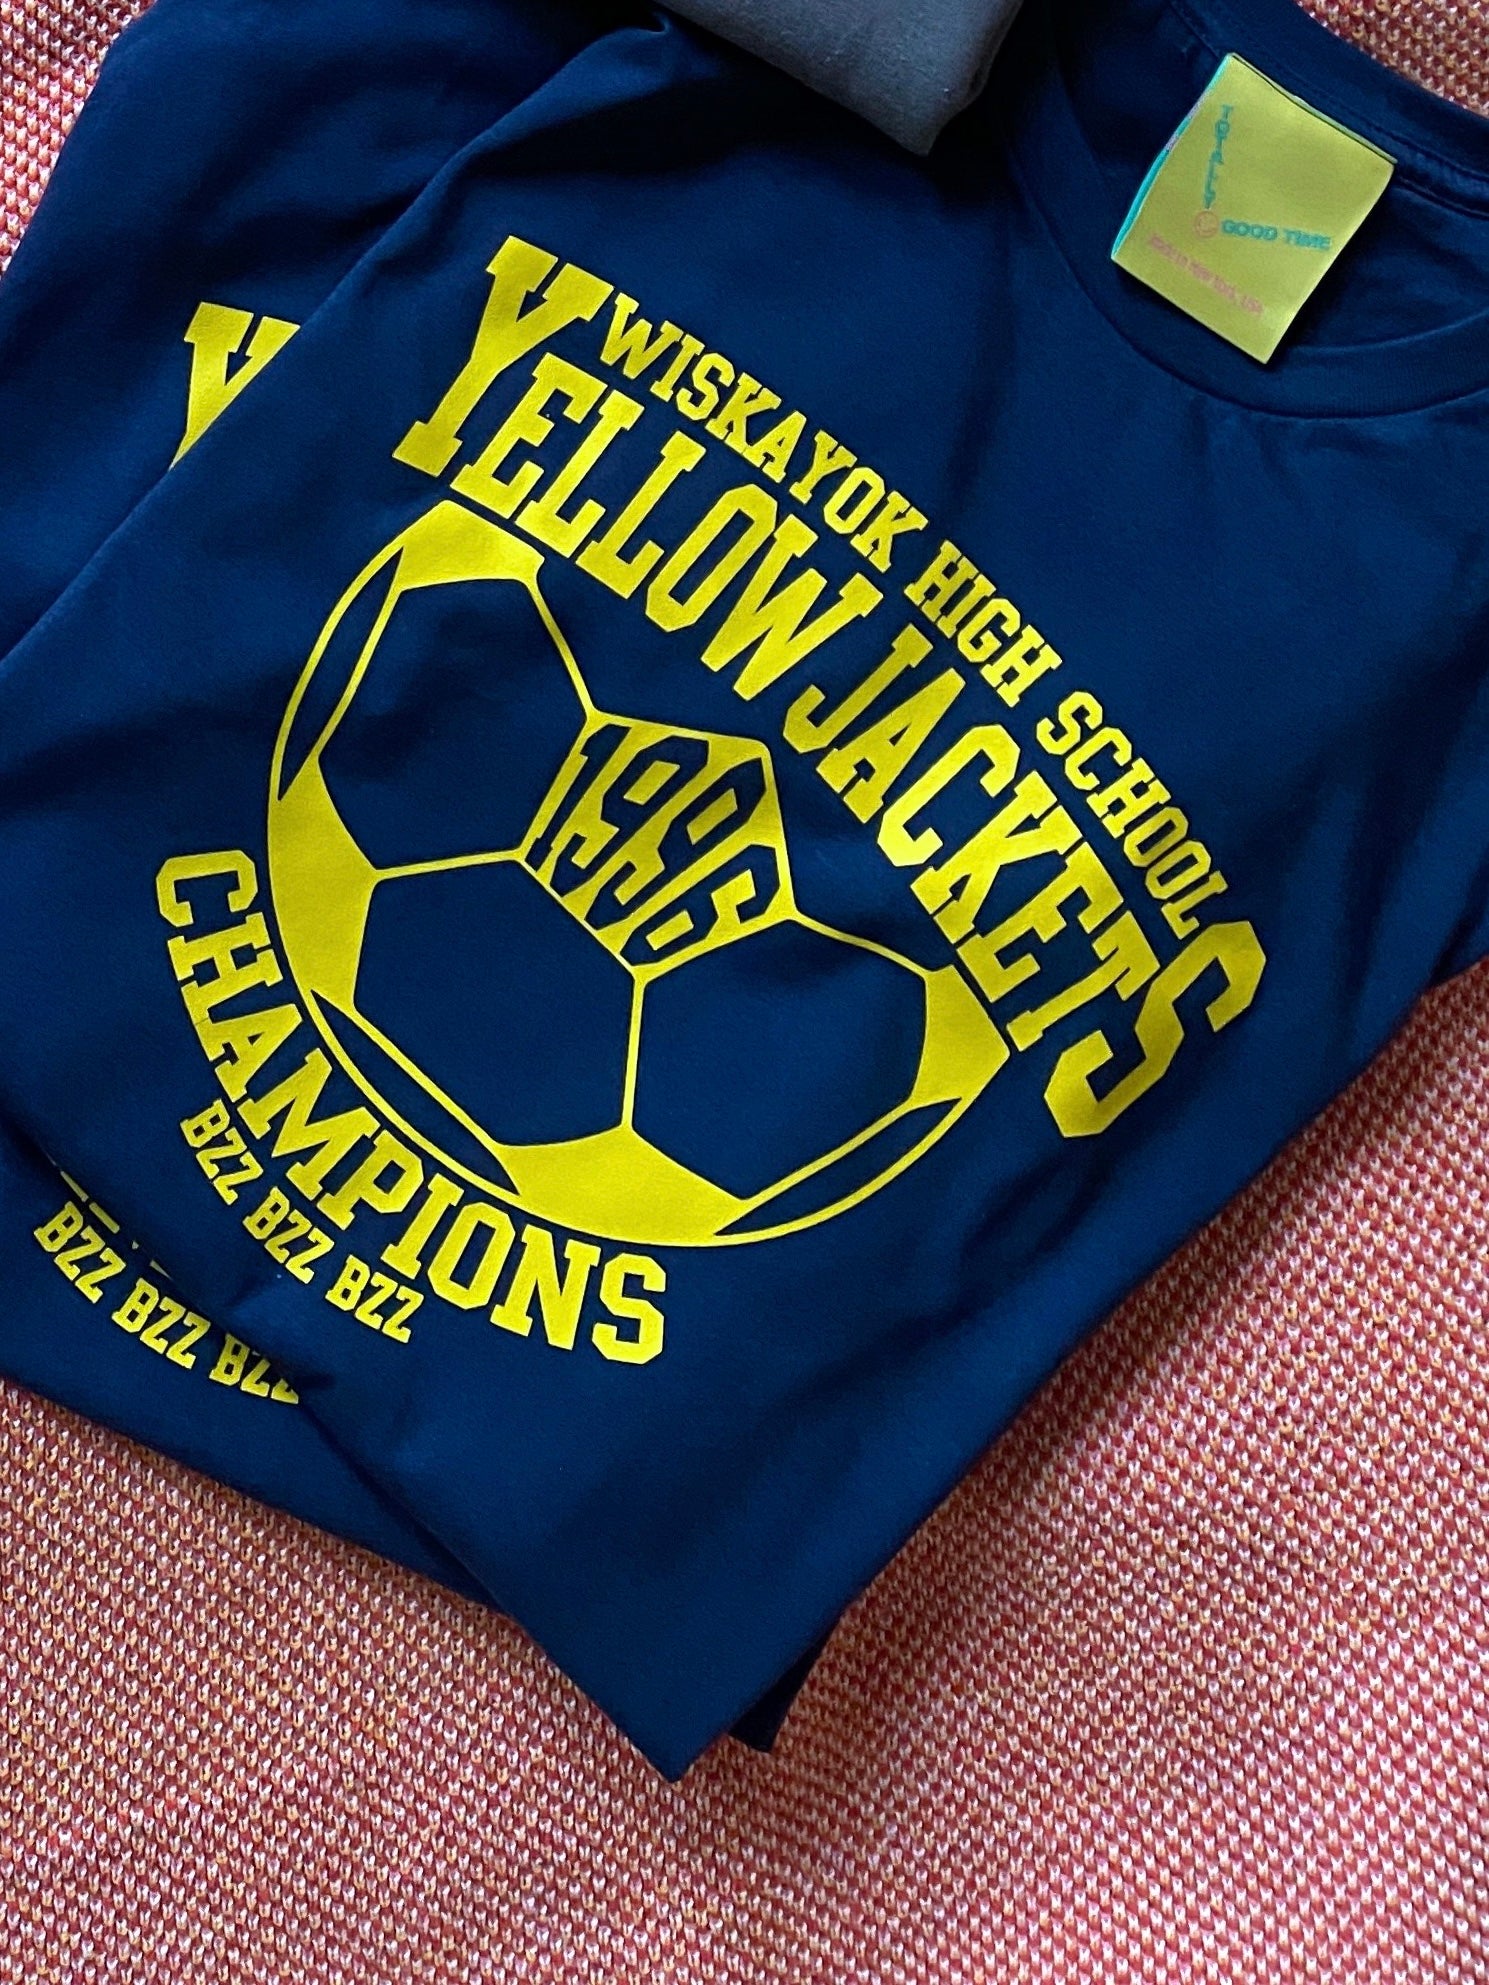 Yellowjackets Champions Tee - Totally Good Time